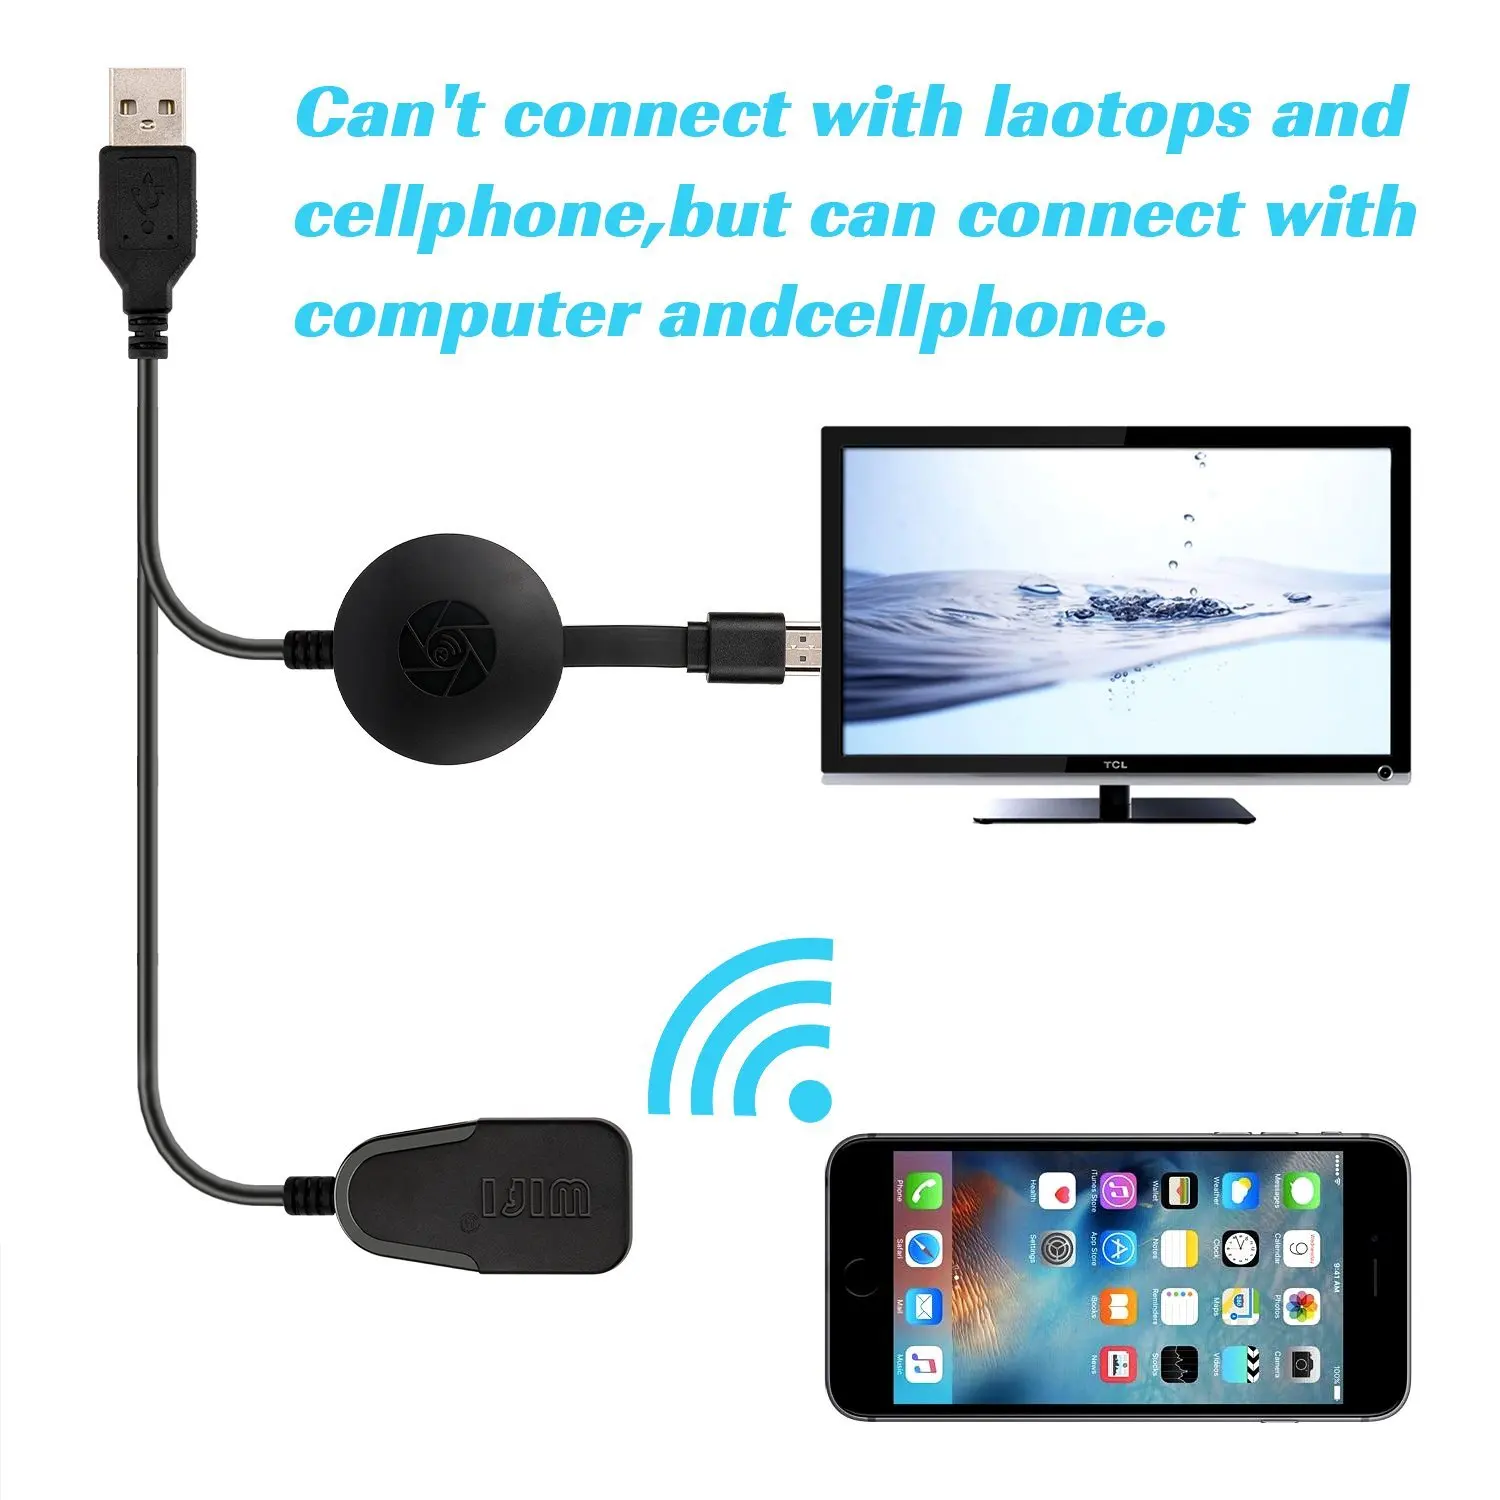 Wireless Display Dongle,WIFI Portable Display Receiver 1080P HDMI Miracast Dongle for iOS iPhone iPad/Mac/Android Smartphones/